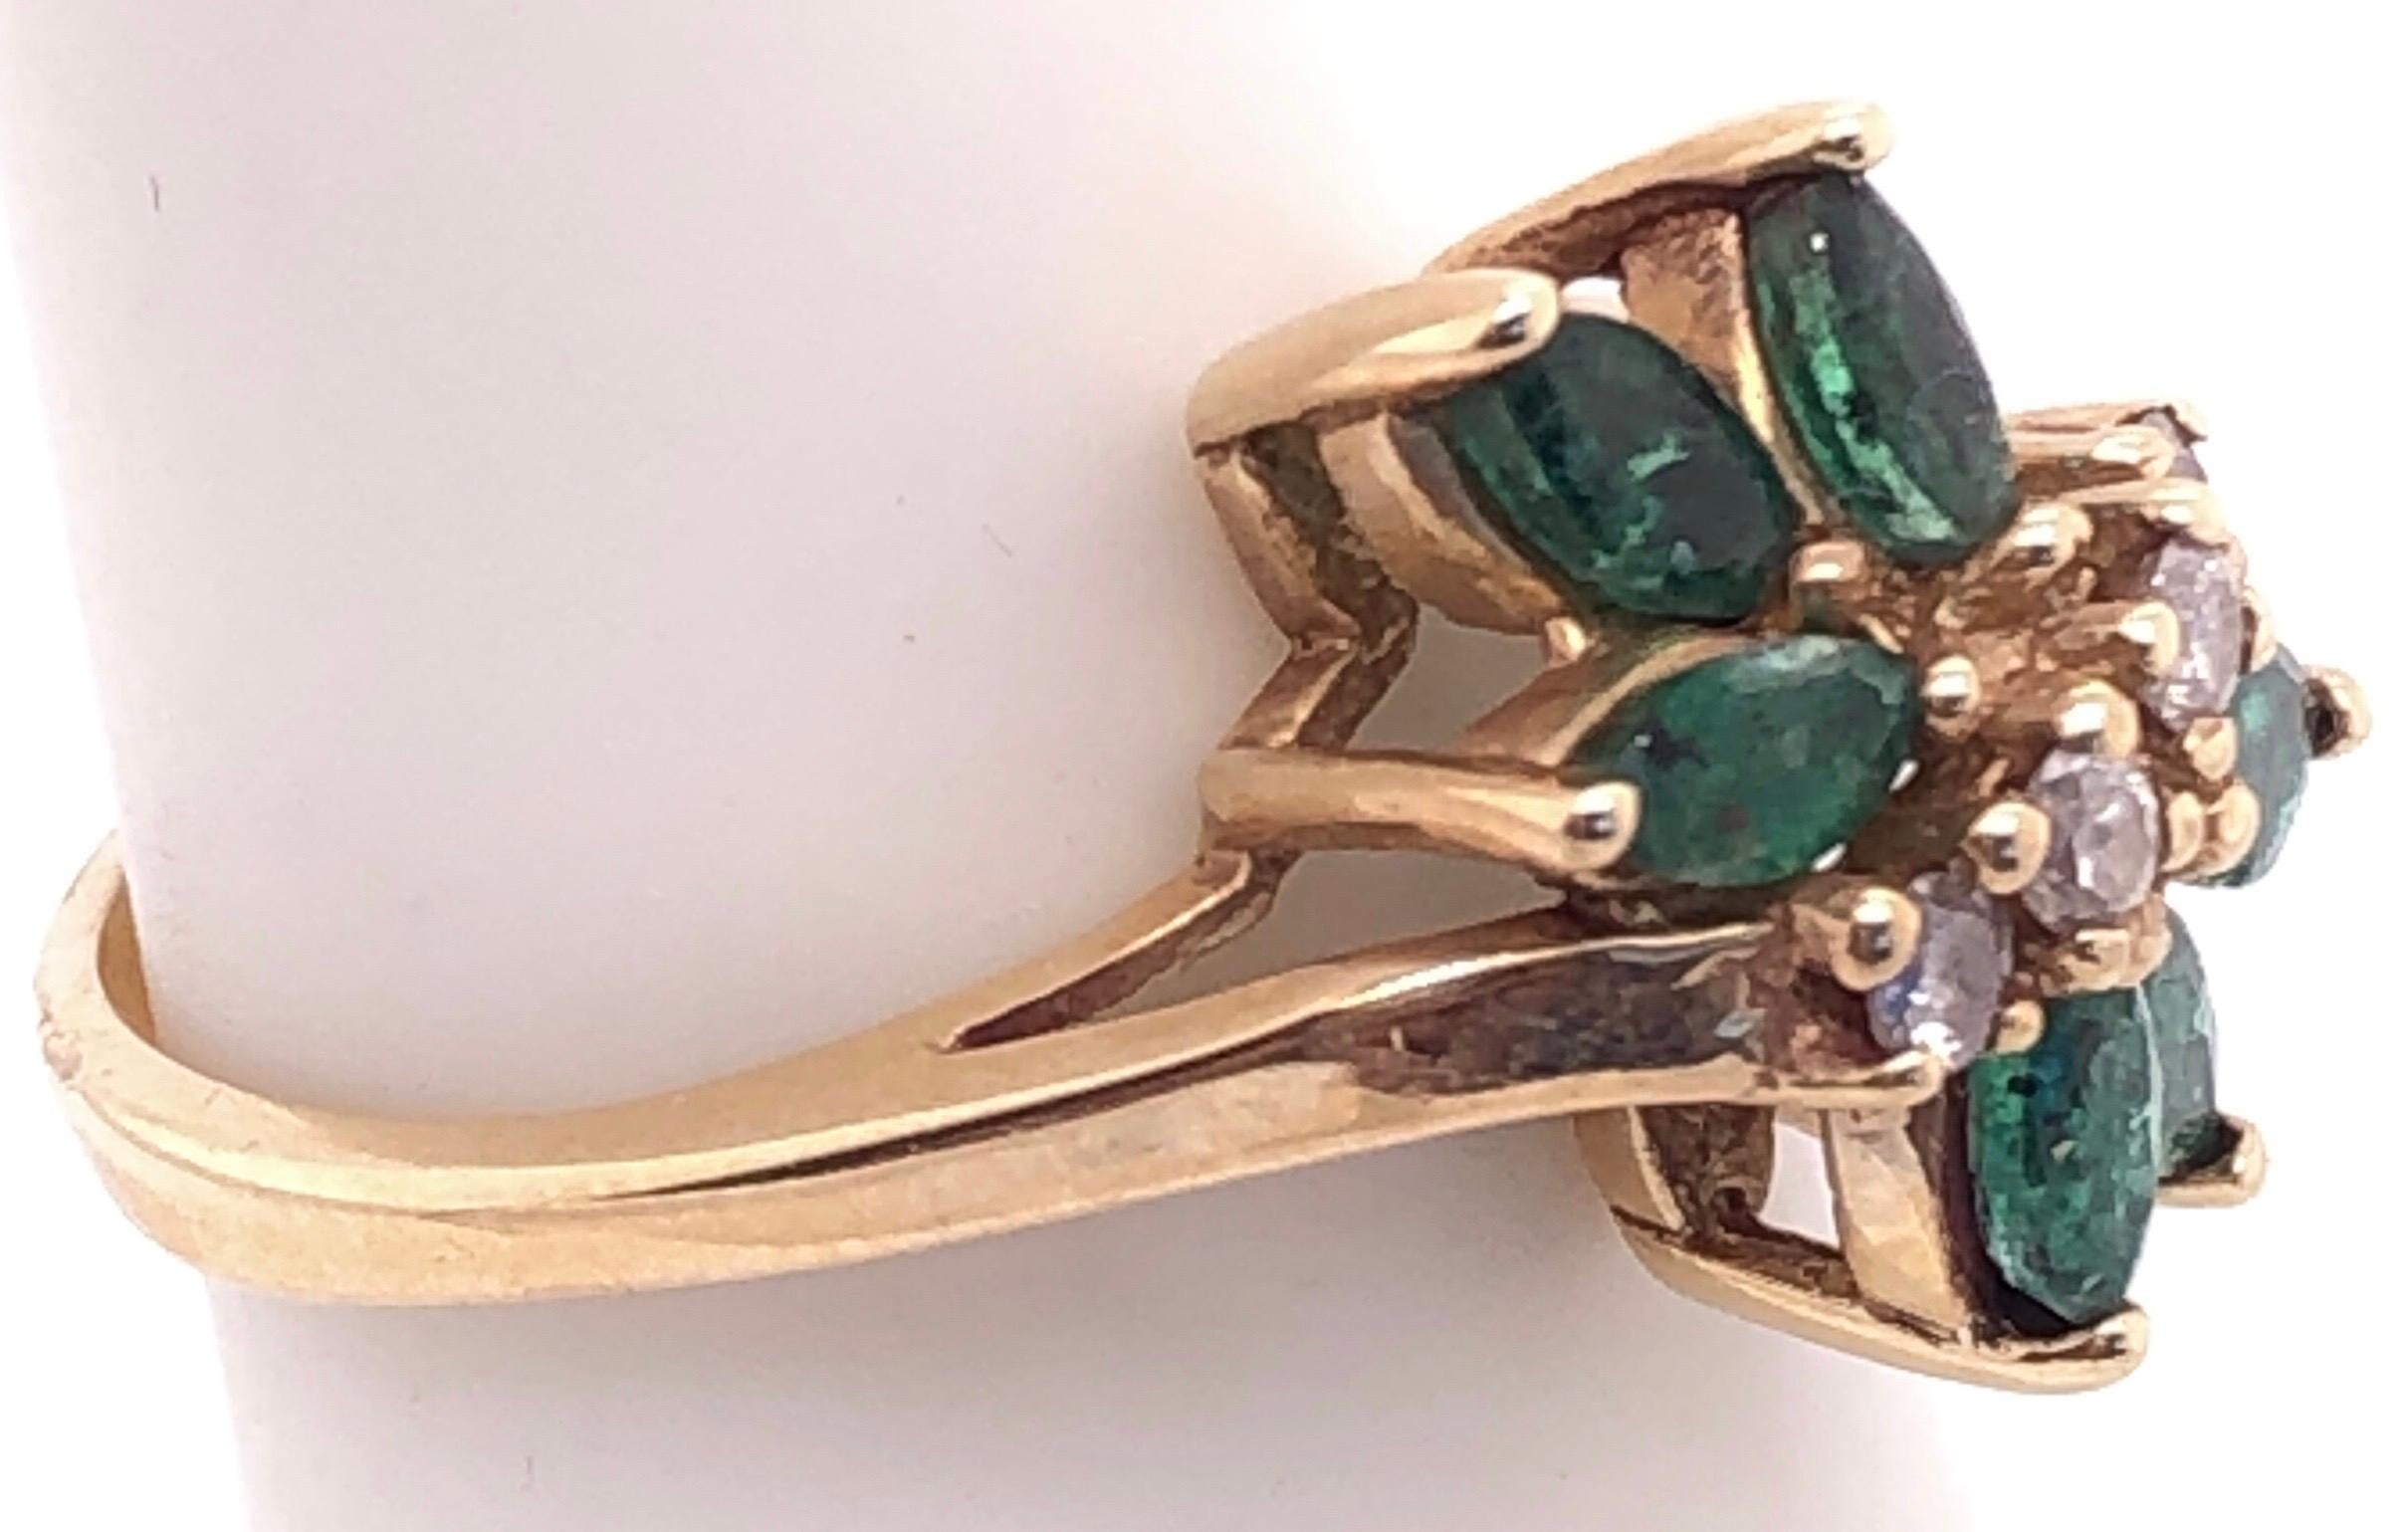 14 Karat Yellow Gold Free Form Emerald With Diamond Accents Ring Size 5.75.
0.04 total diamond weight.
6 piece oval emerald
3.48 grams total weight.